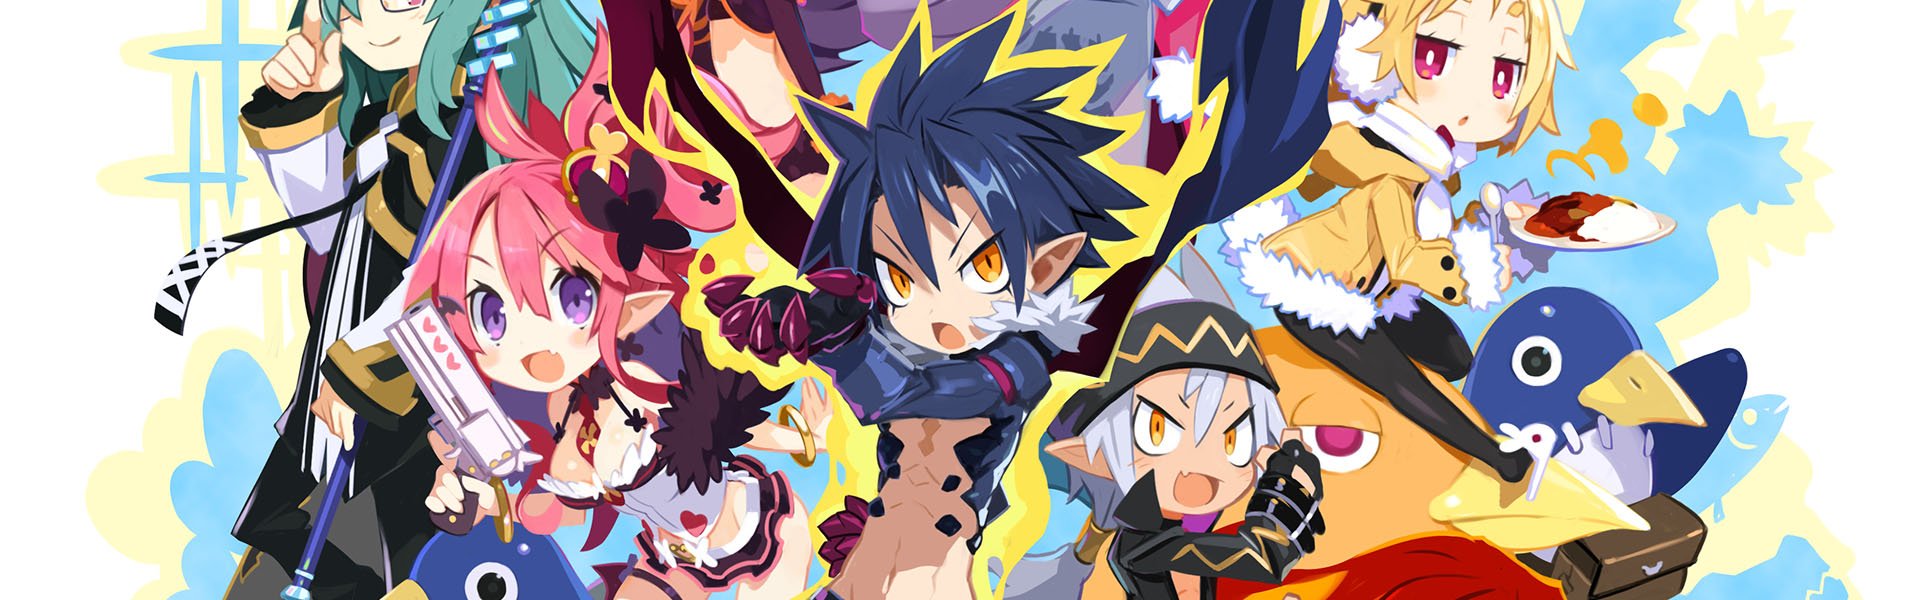 Disgaea 5 Complete Review 25